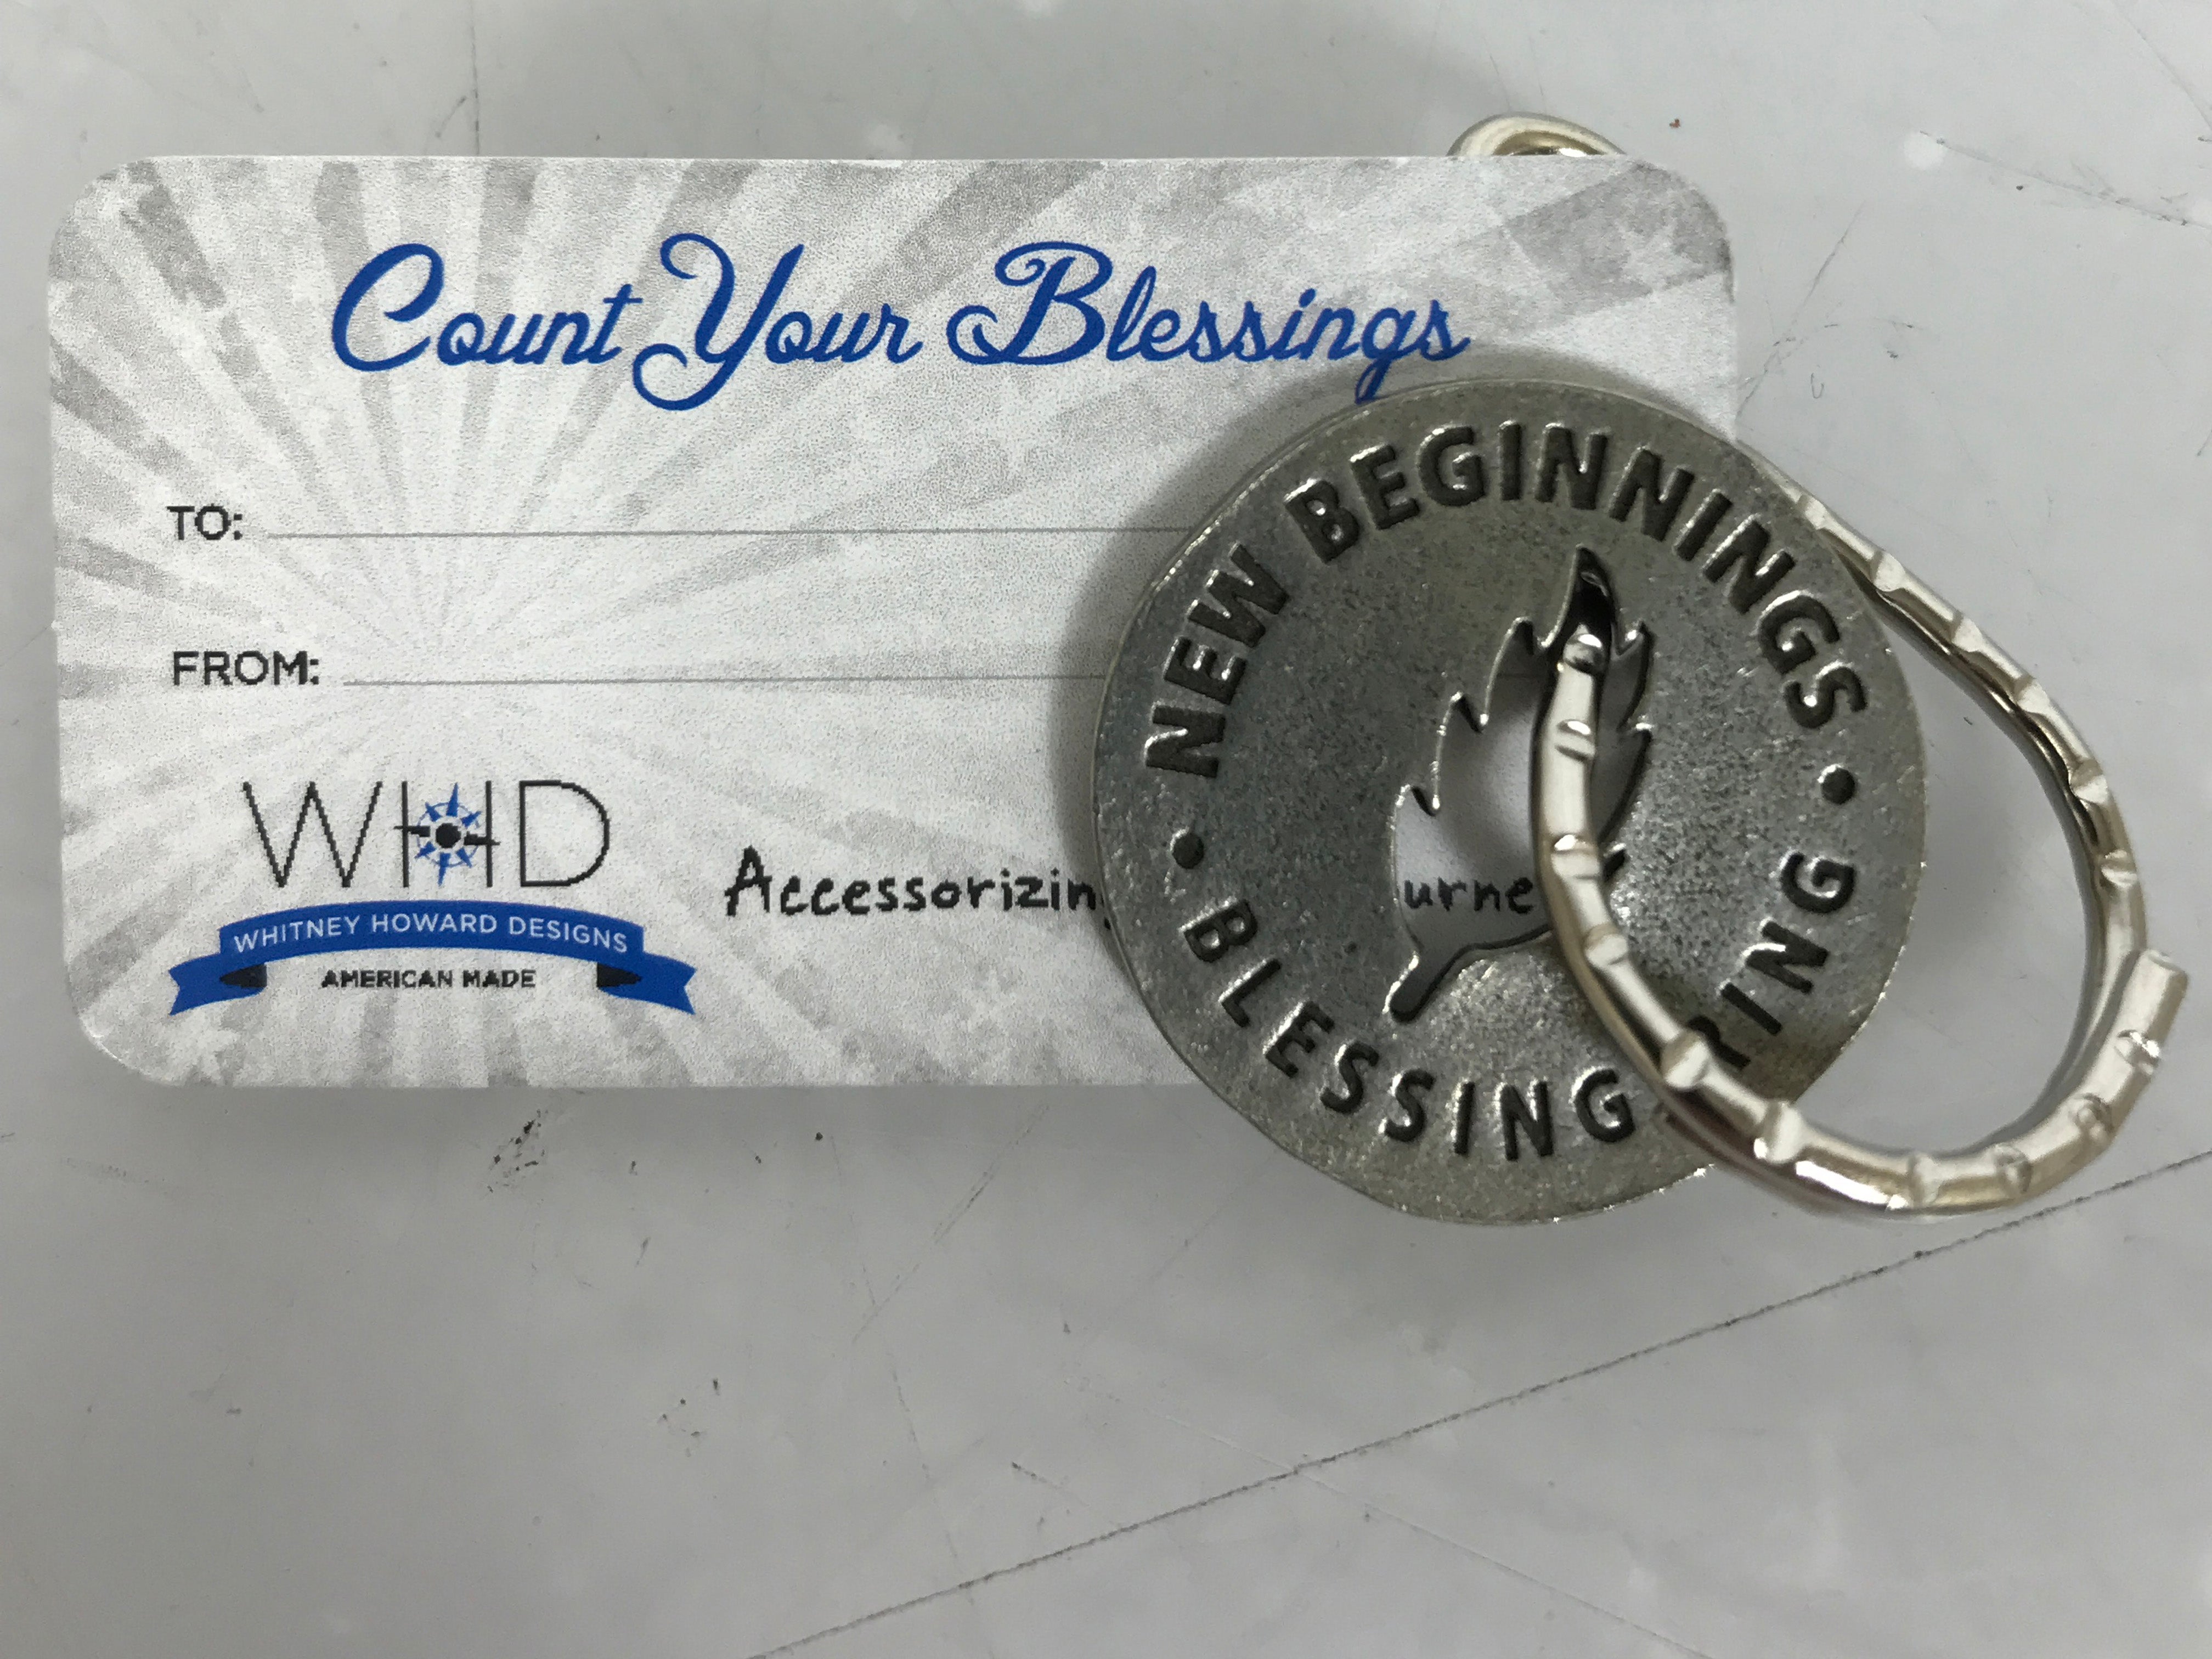 WHD BlessingRings "New Beginnings" Keychain